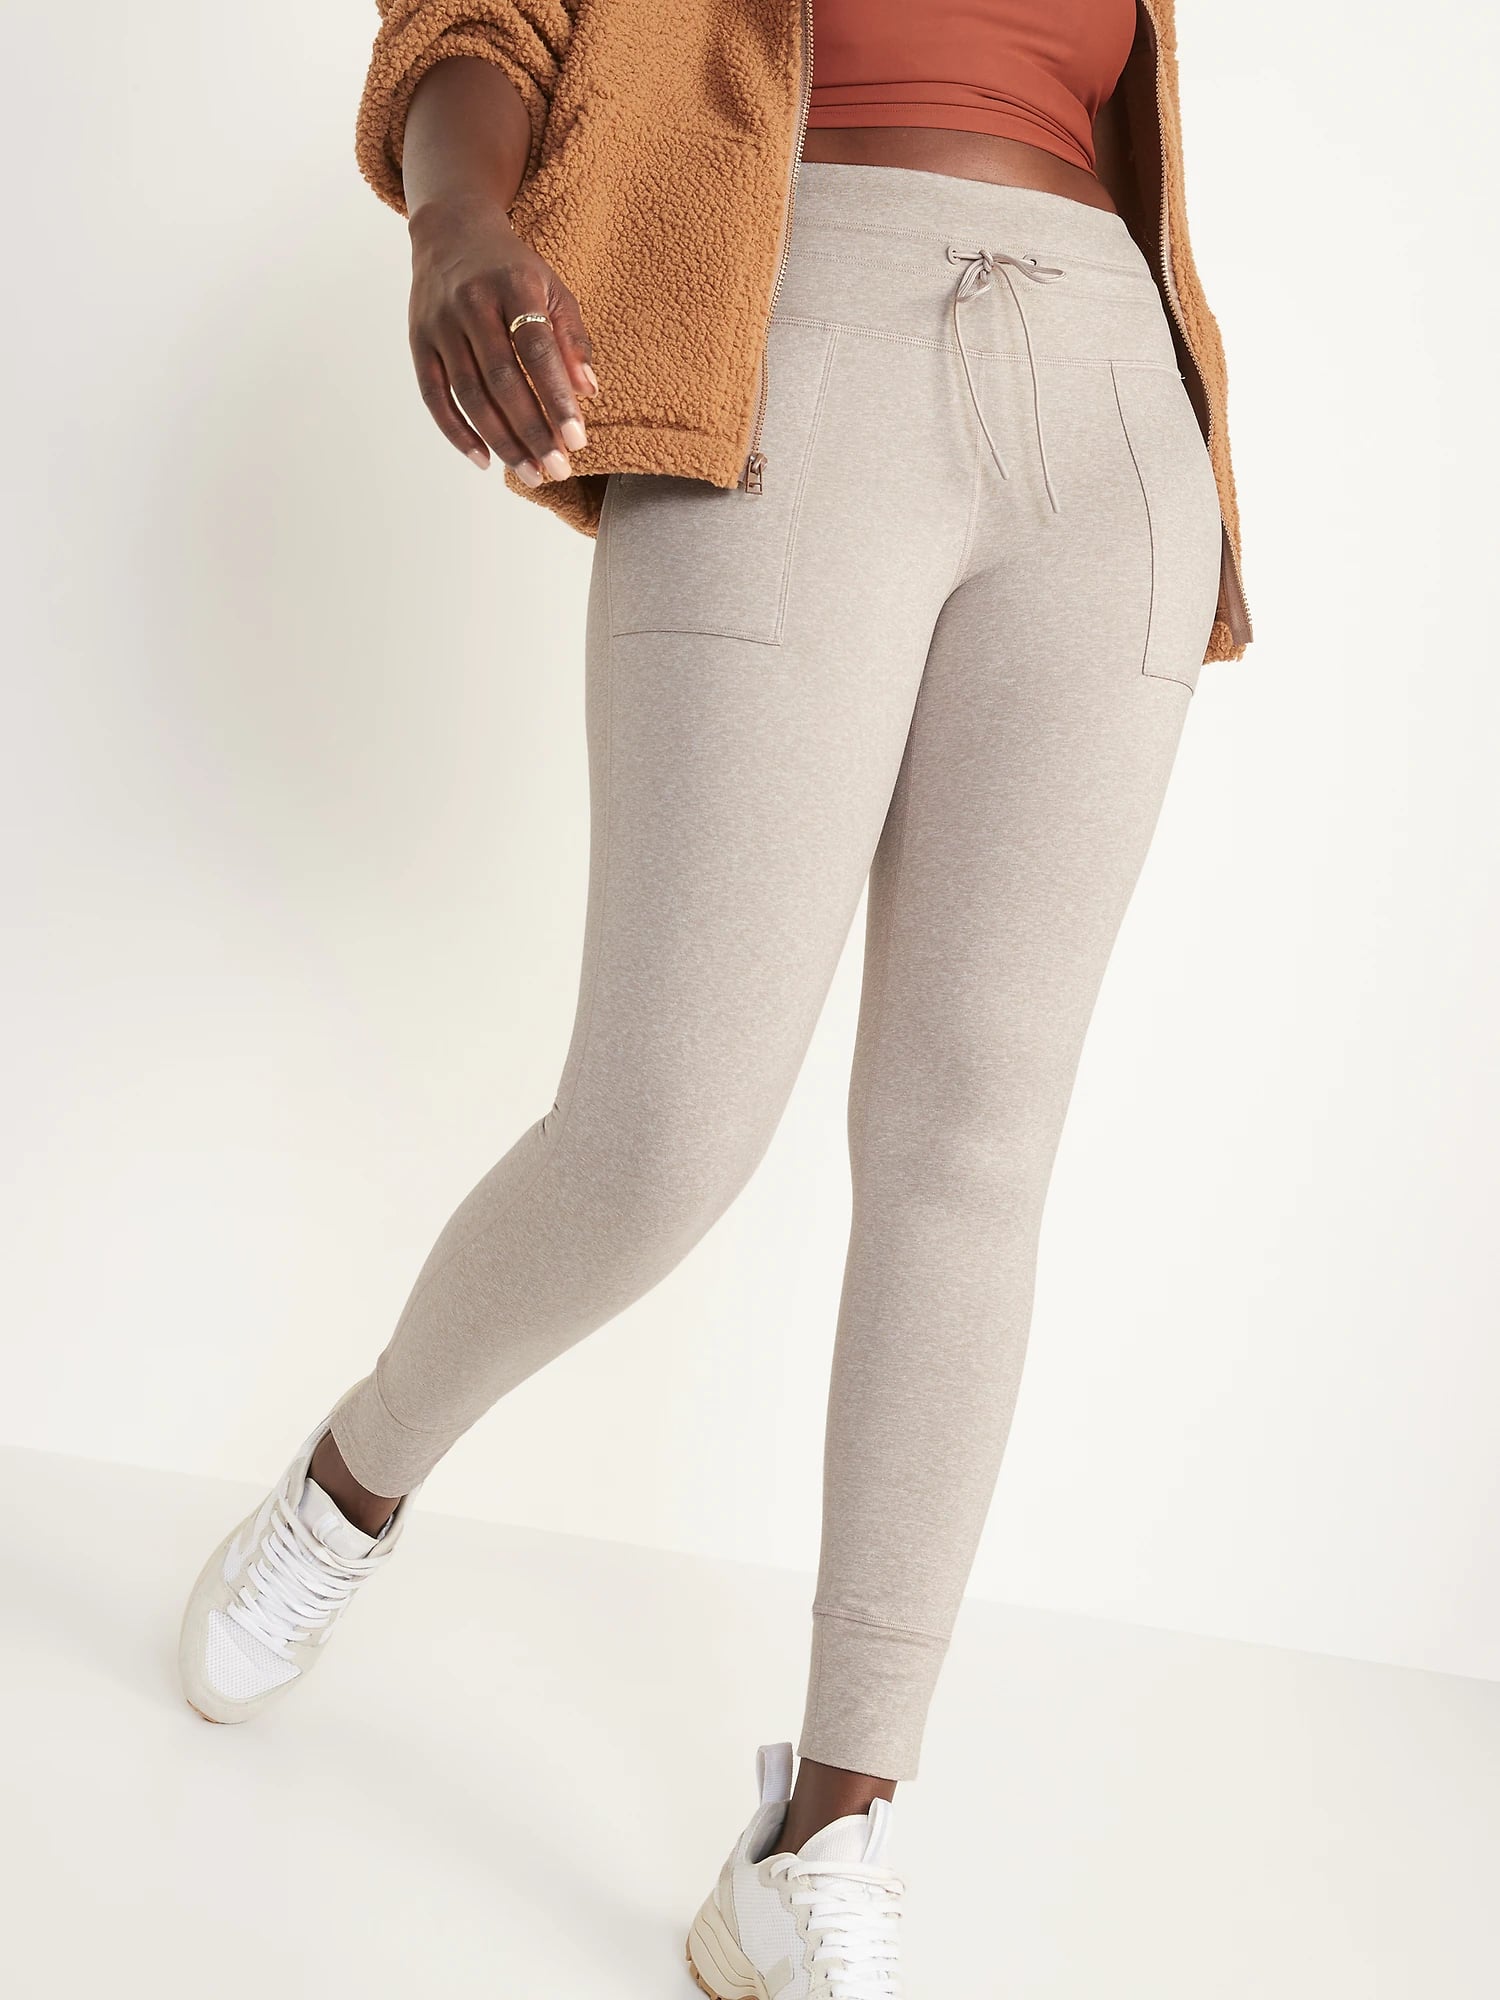 Thick Warm Leggings With Pockets at Old Navy